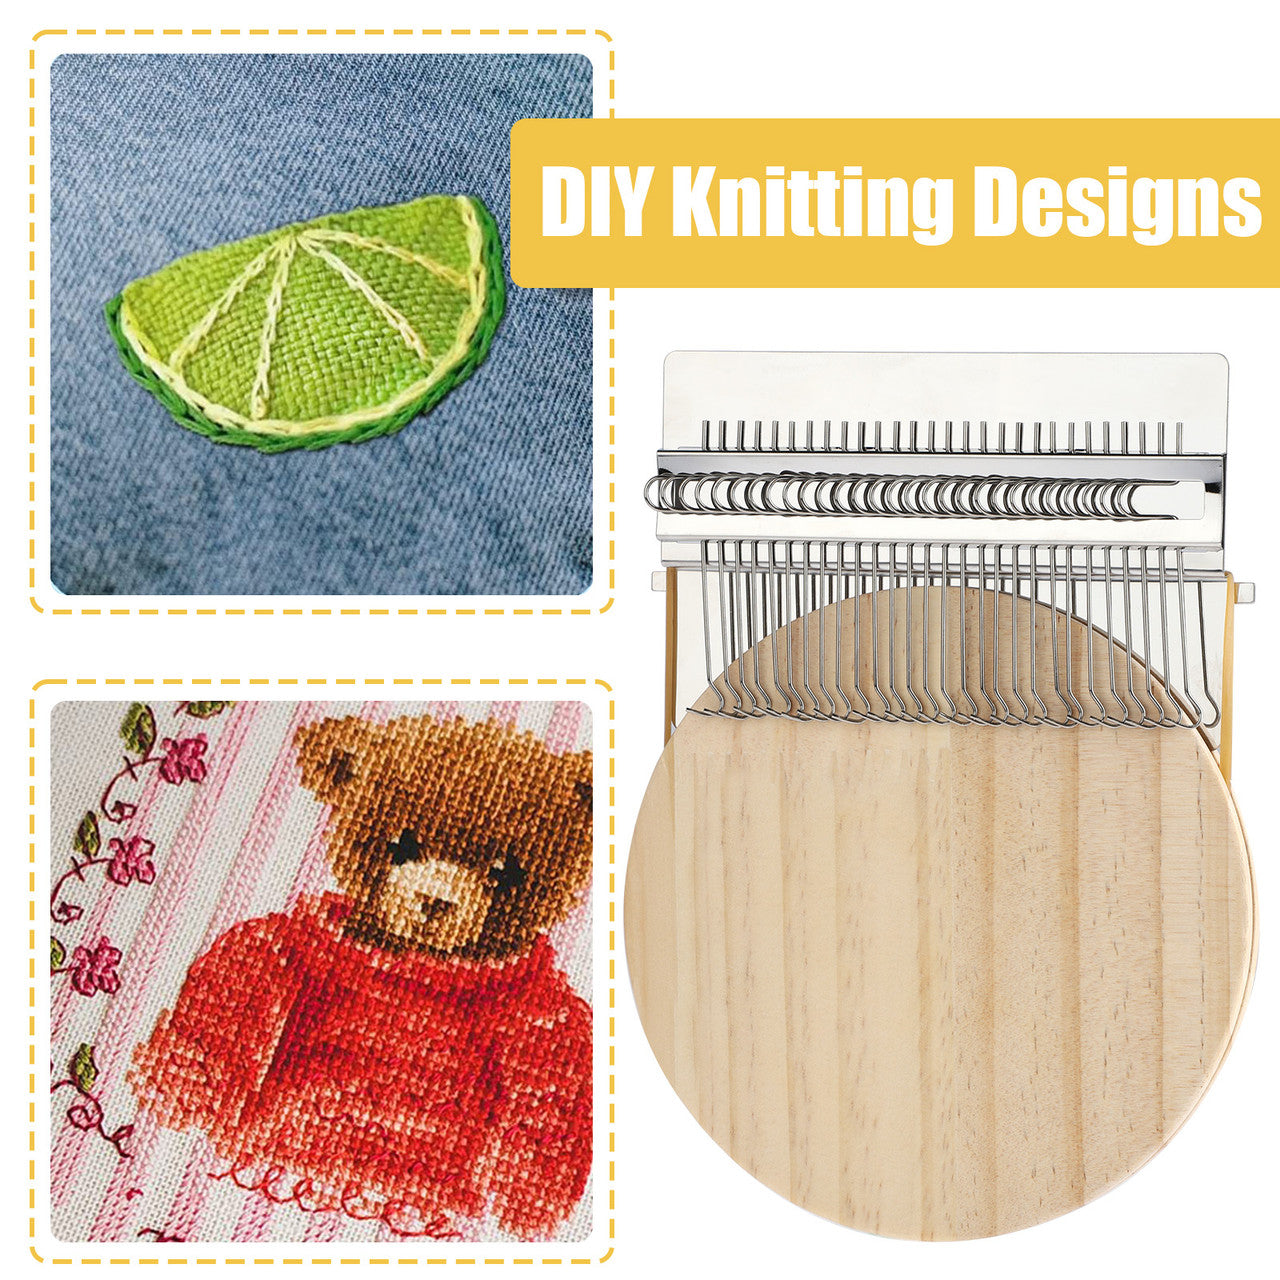 Small Knitting Machine Tools for Easy DIY Knitting Designs and Great as a Sewing Helper